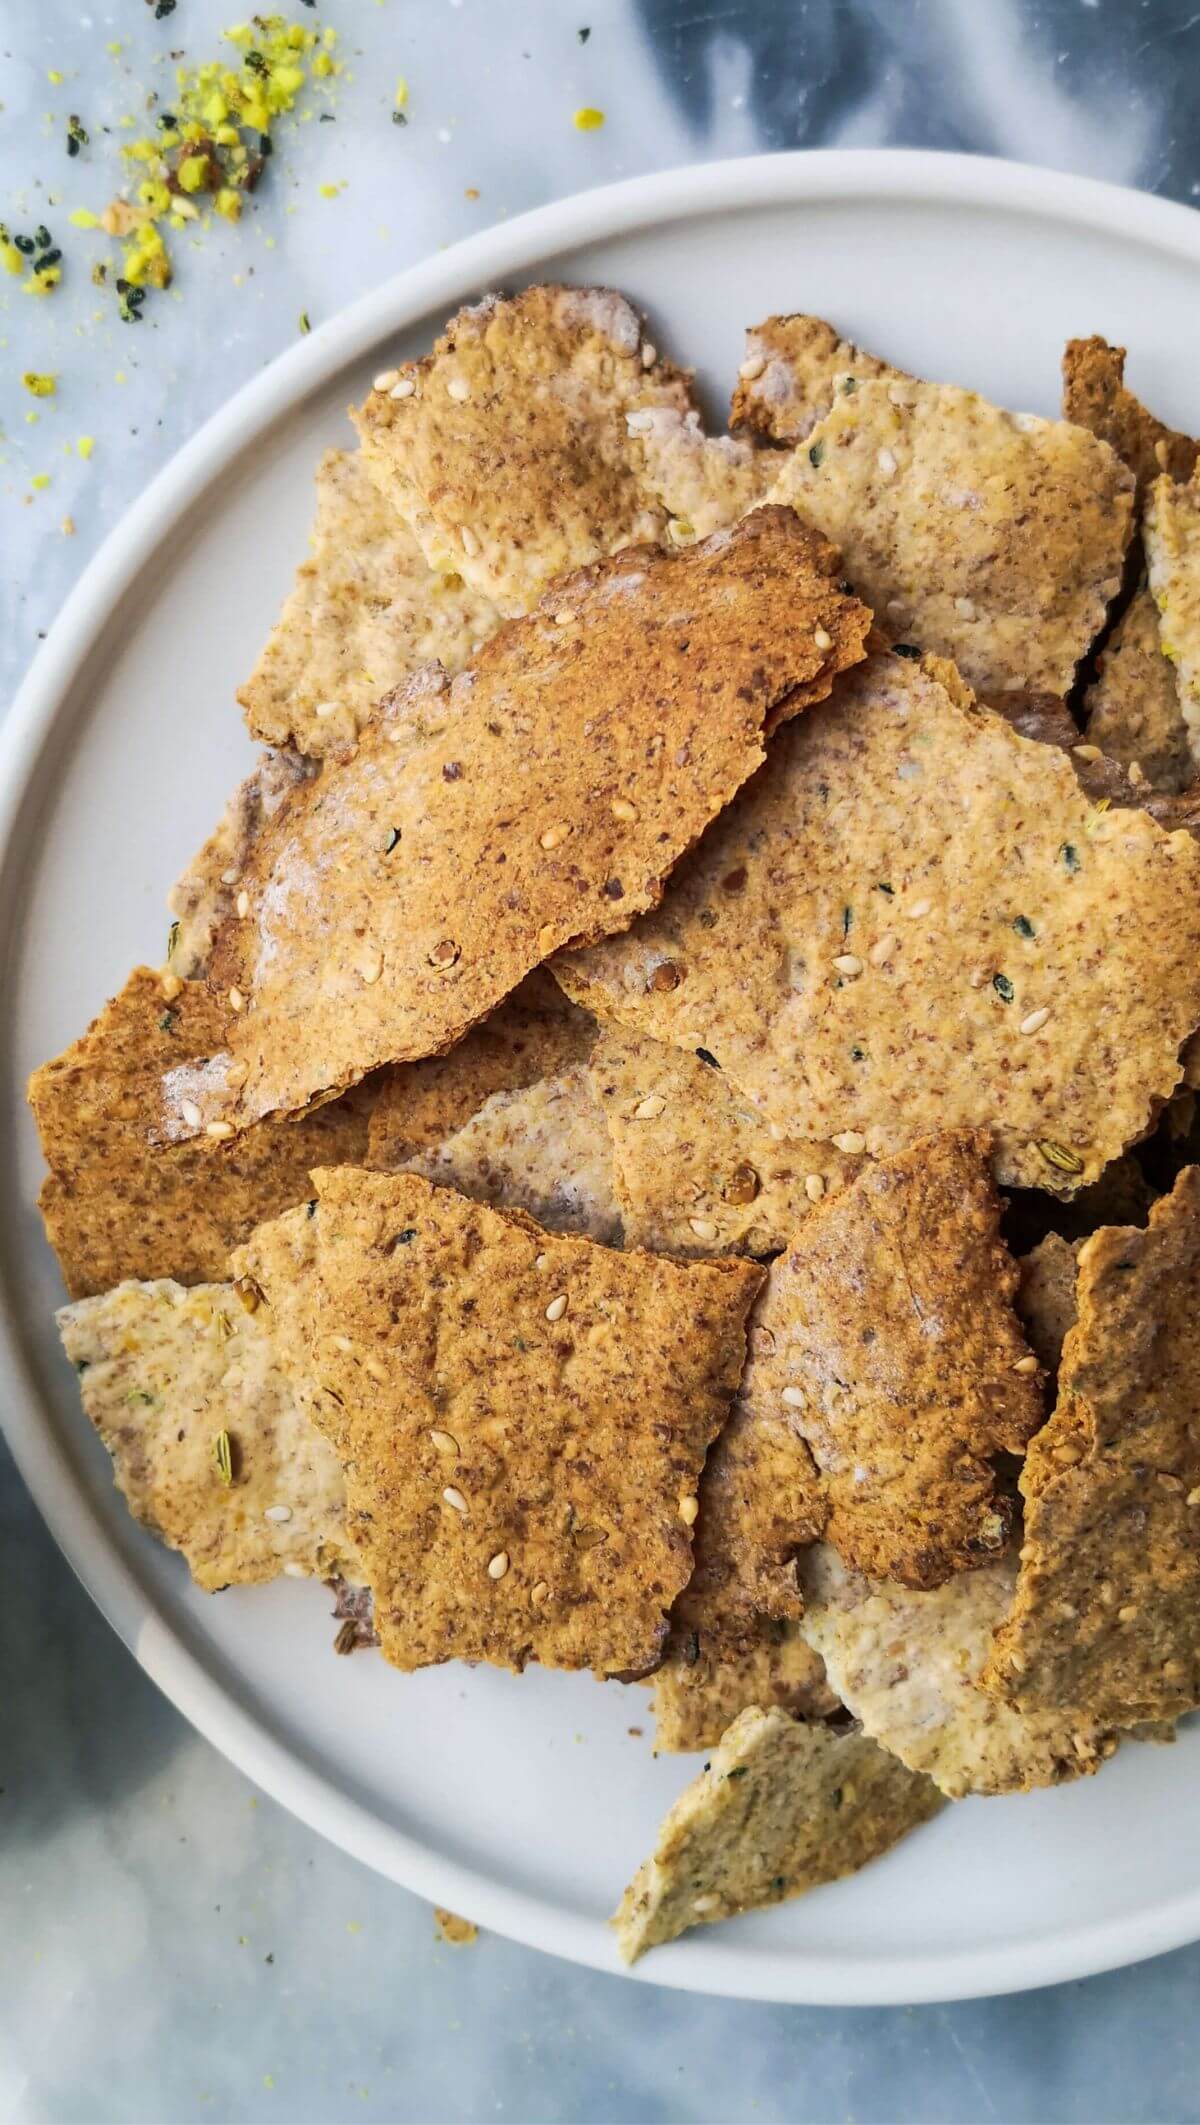 Sourdough crackers on a white plate with dukkah on the side.